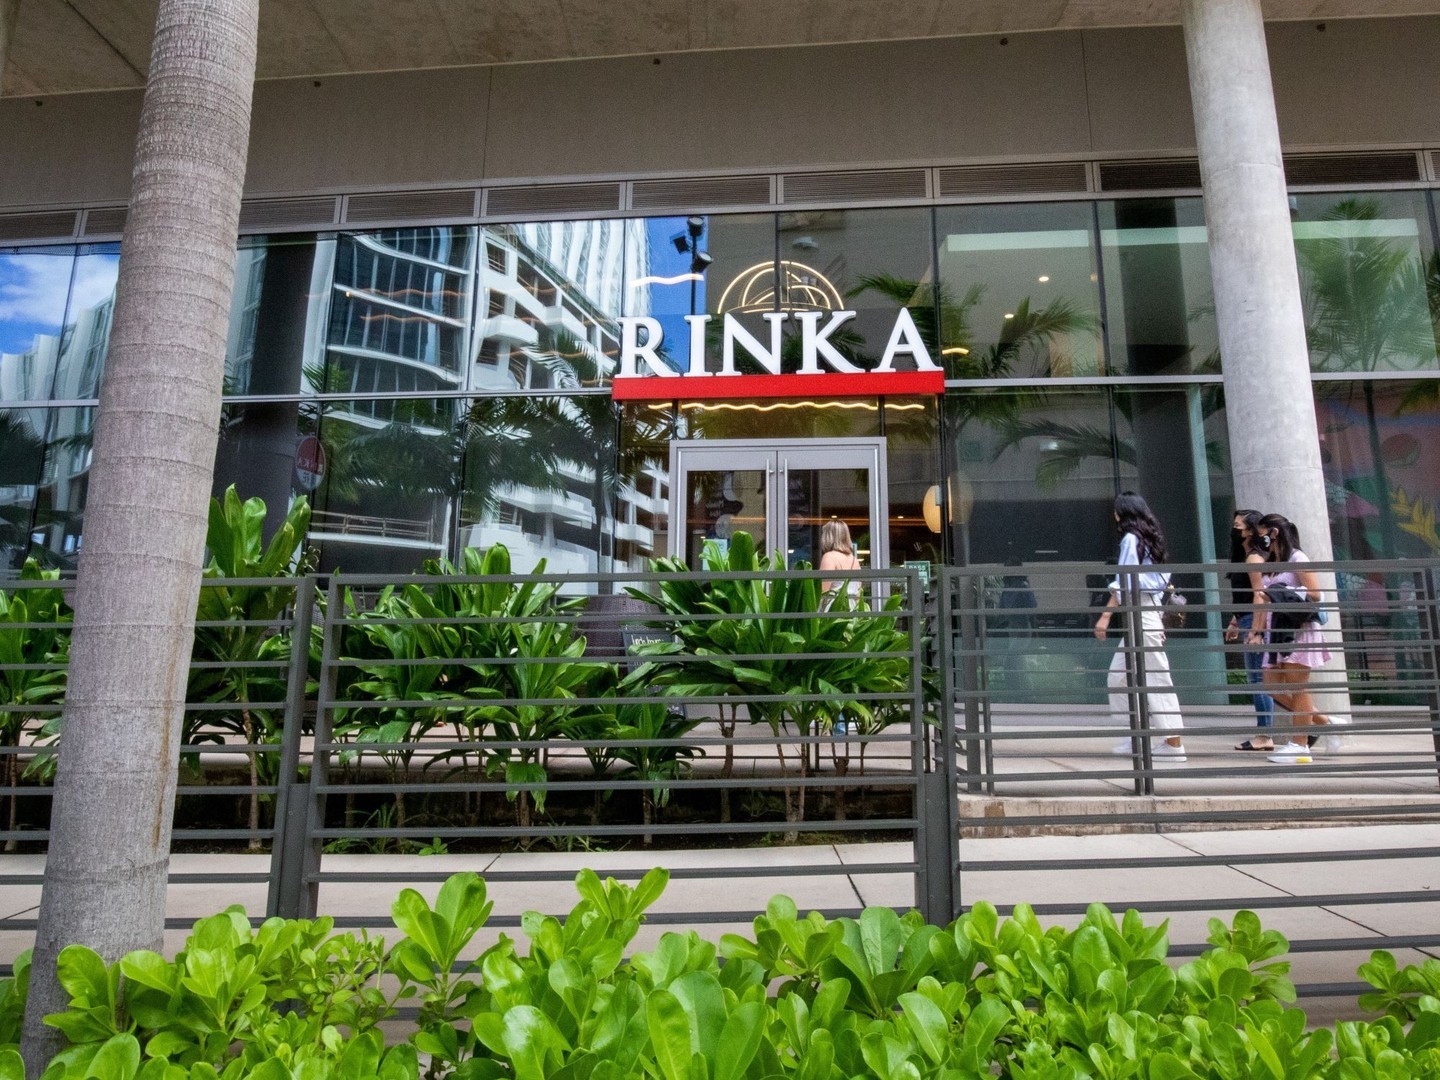 Lunch at @rinka_restaurant is an opportunity to experience authentic Japanese cuisine in a sleek, modern setting. With indoor and outdoor seating, the set menu is perfect for a break from your workday or to celebrate a special occasion. Located in the Ae‘o Shops, lunch is served daily from 11am-3pm.